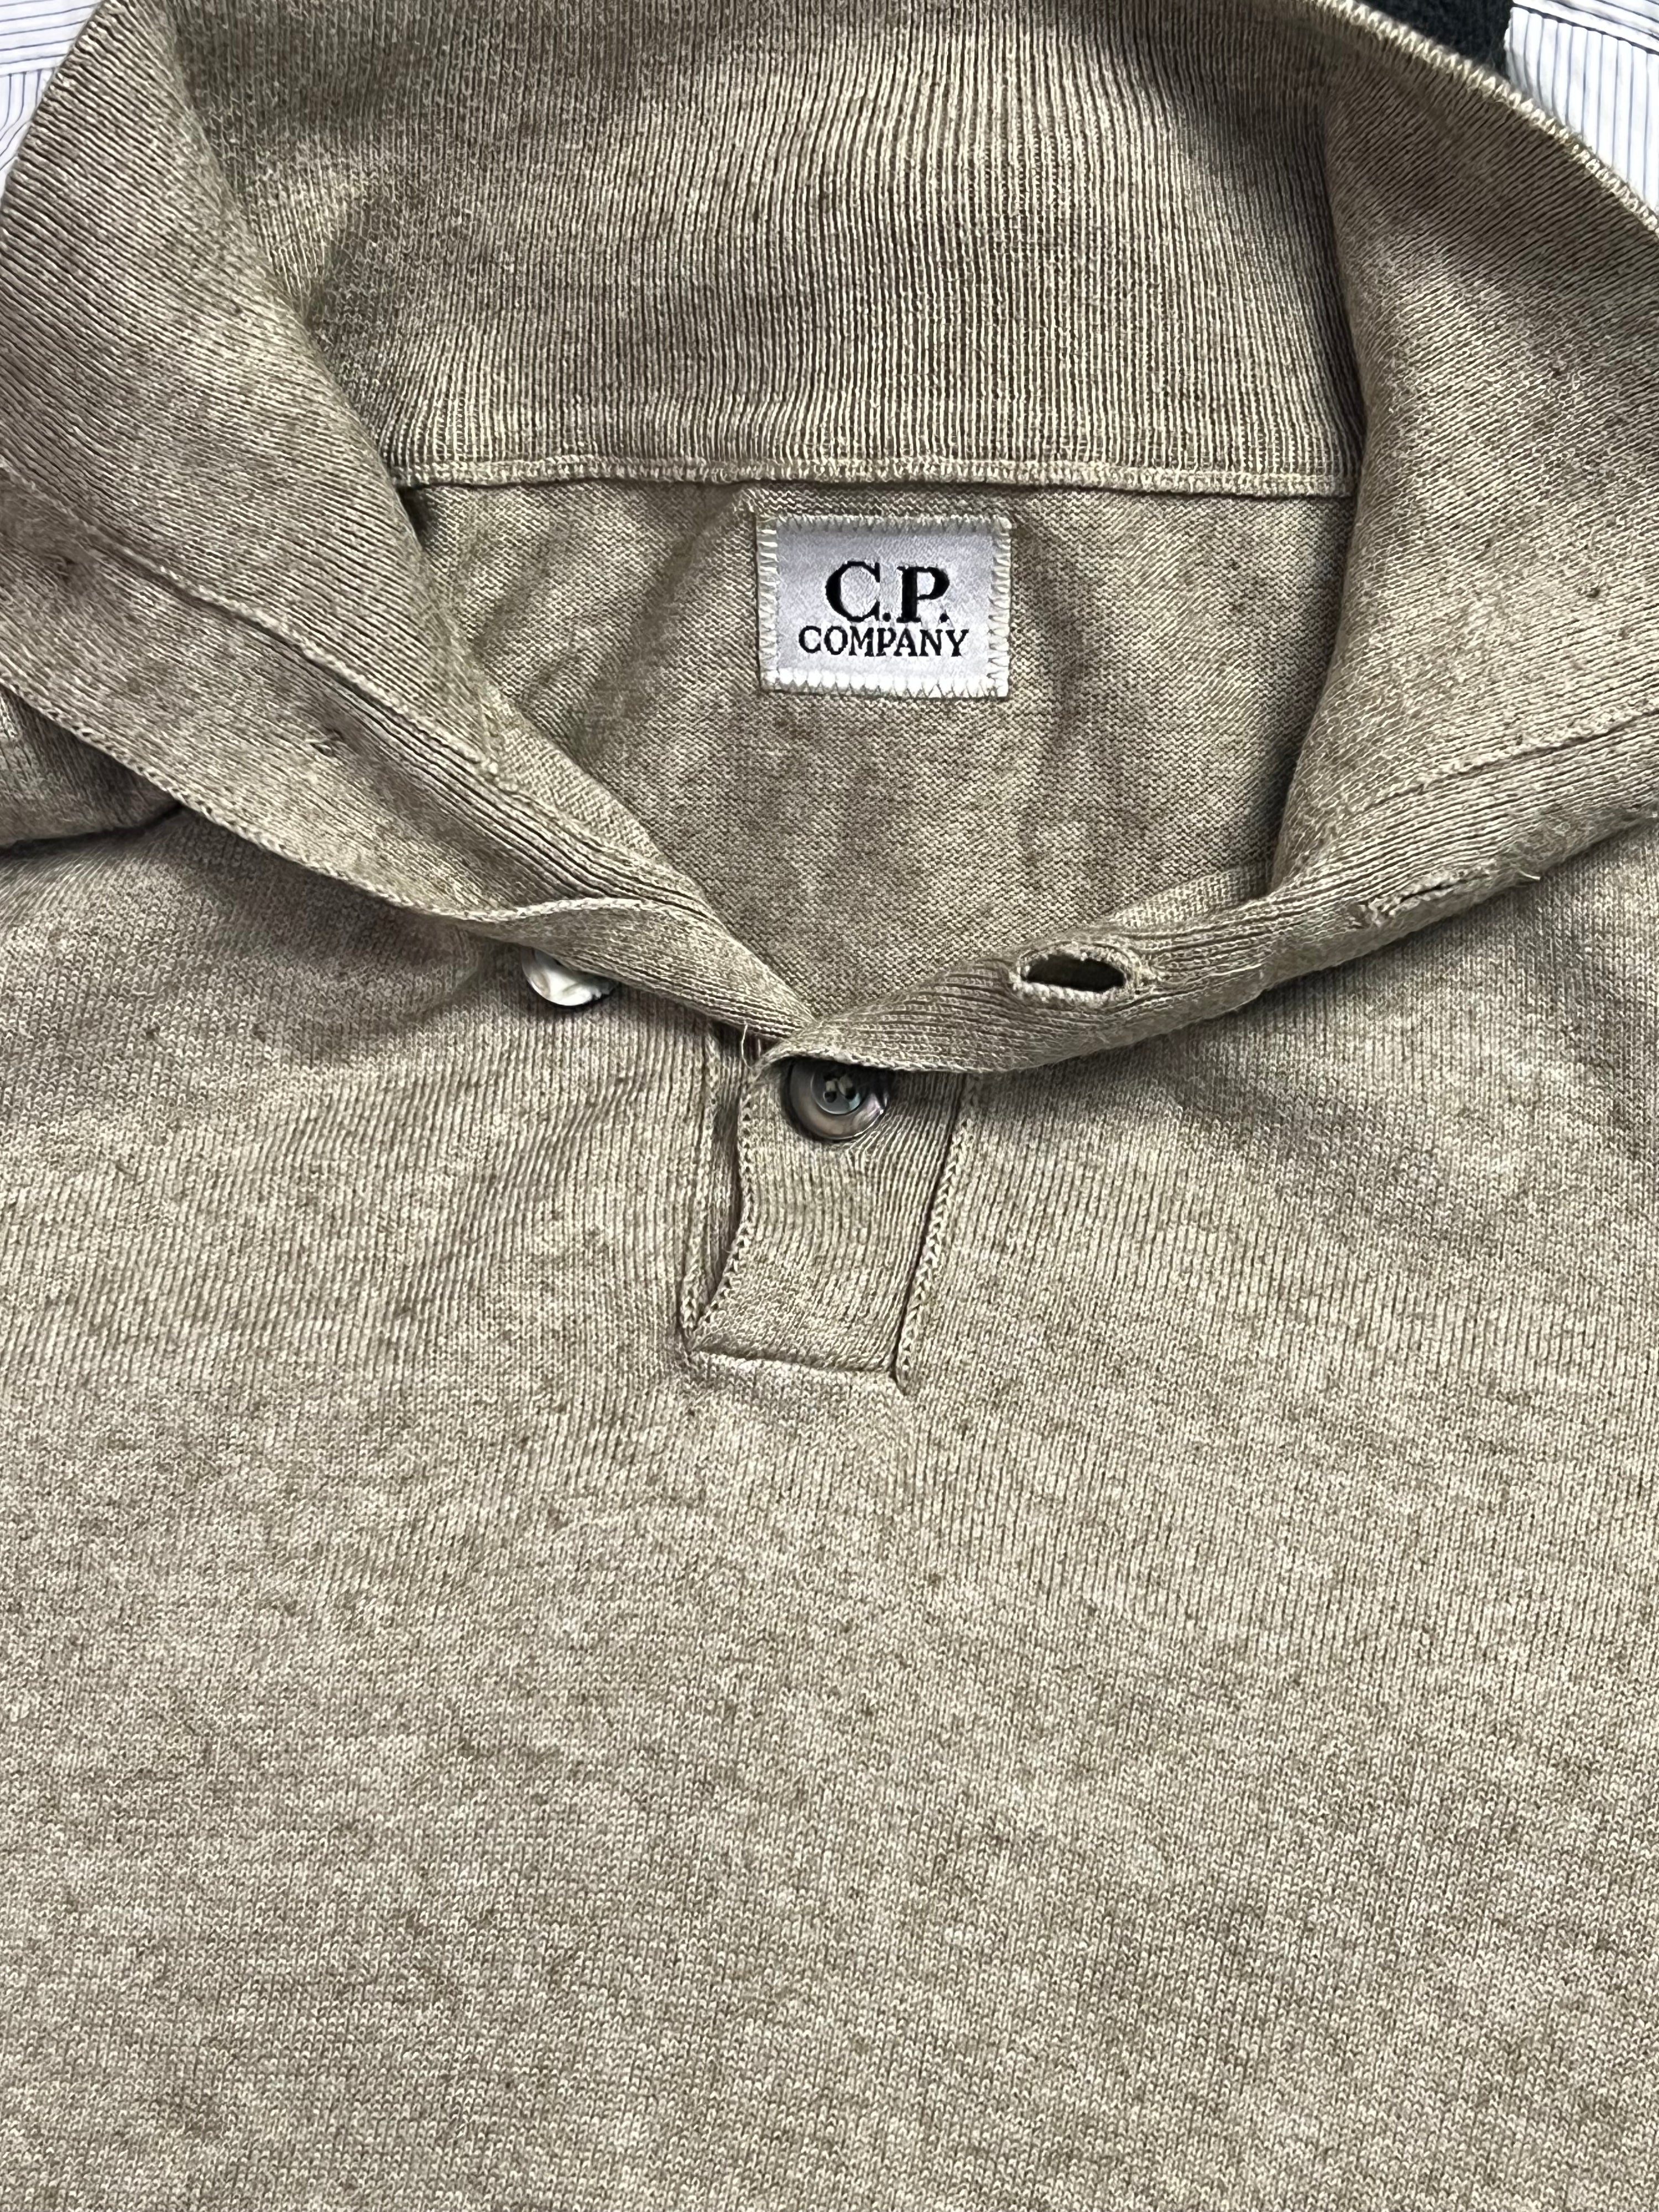 Early 2000s C.P. Company Highneck Knit Poloshirt Sweater (S)